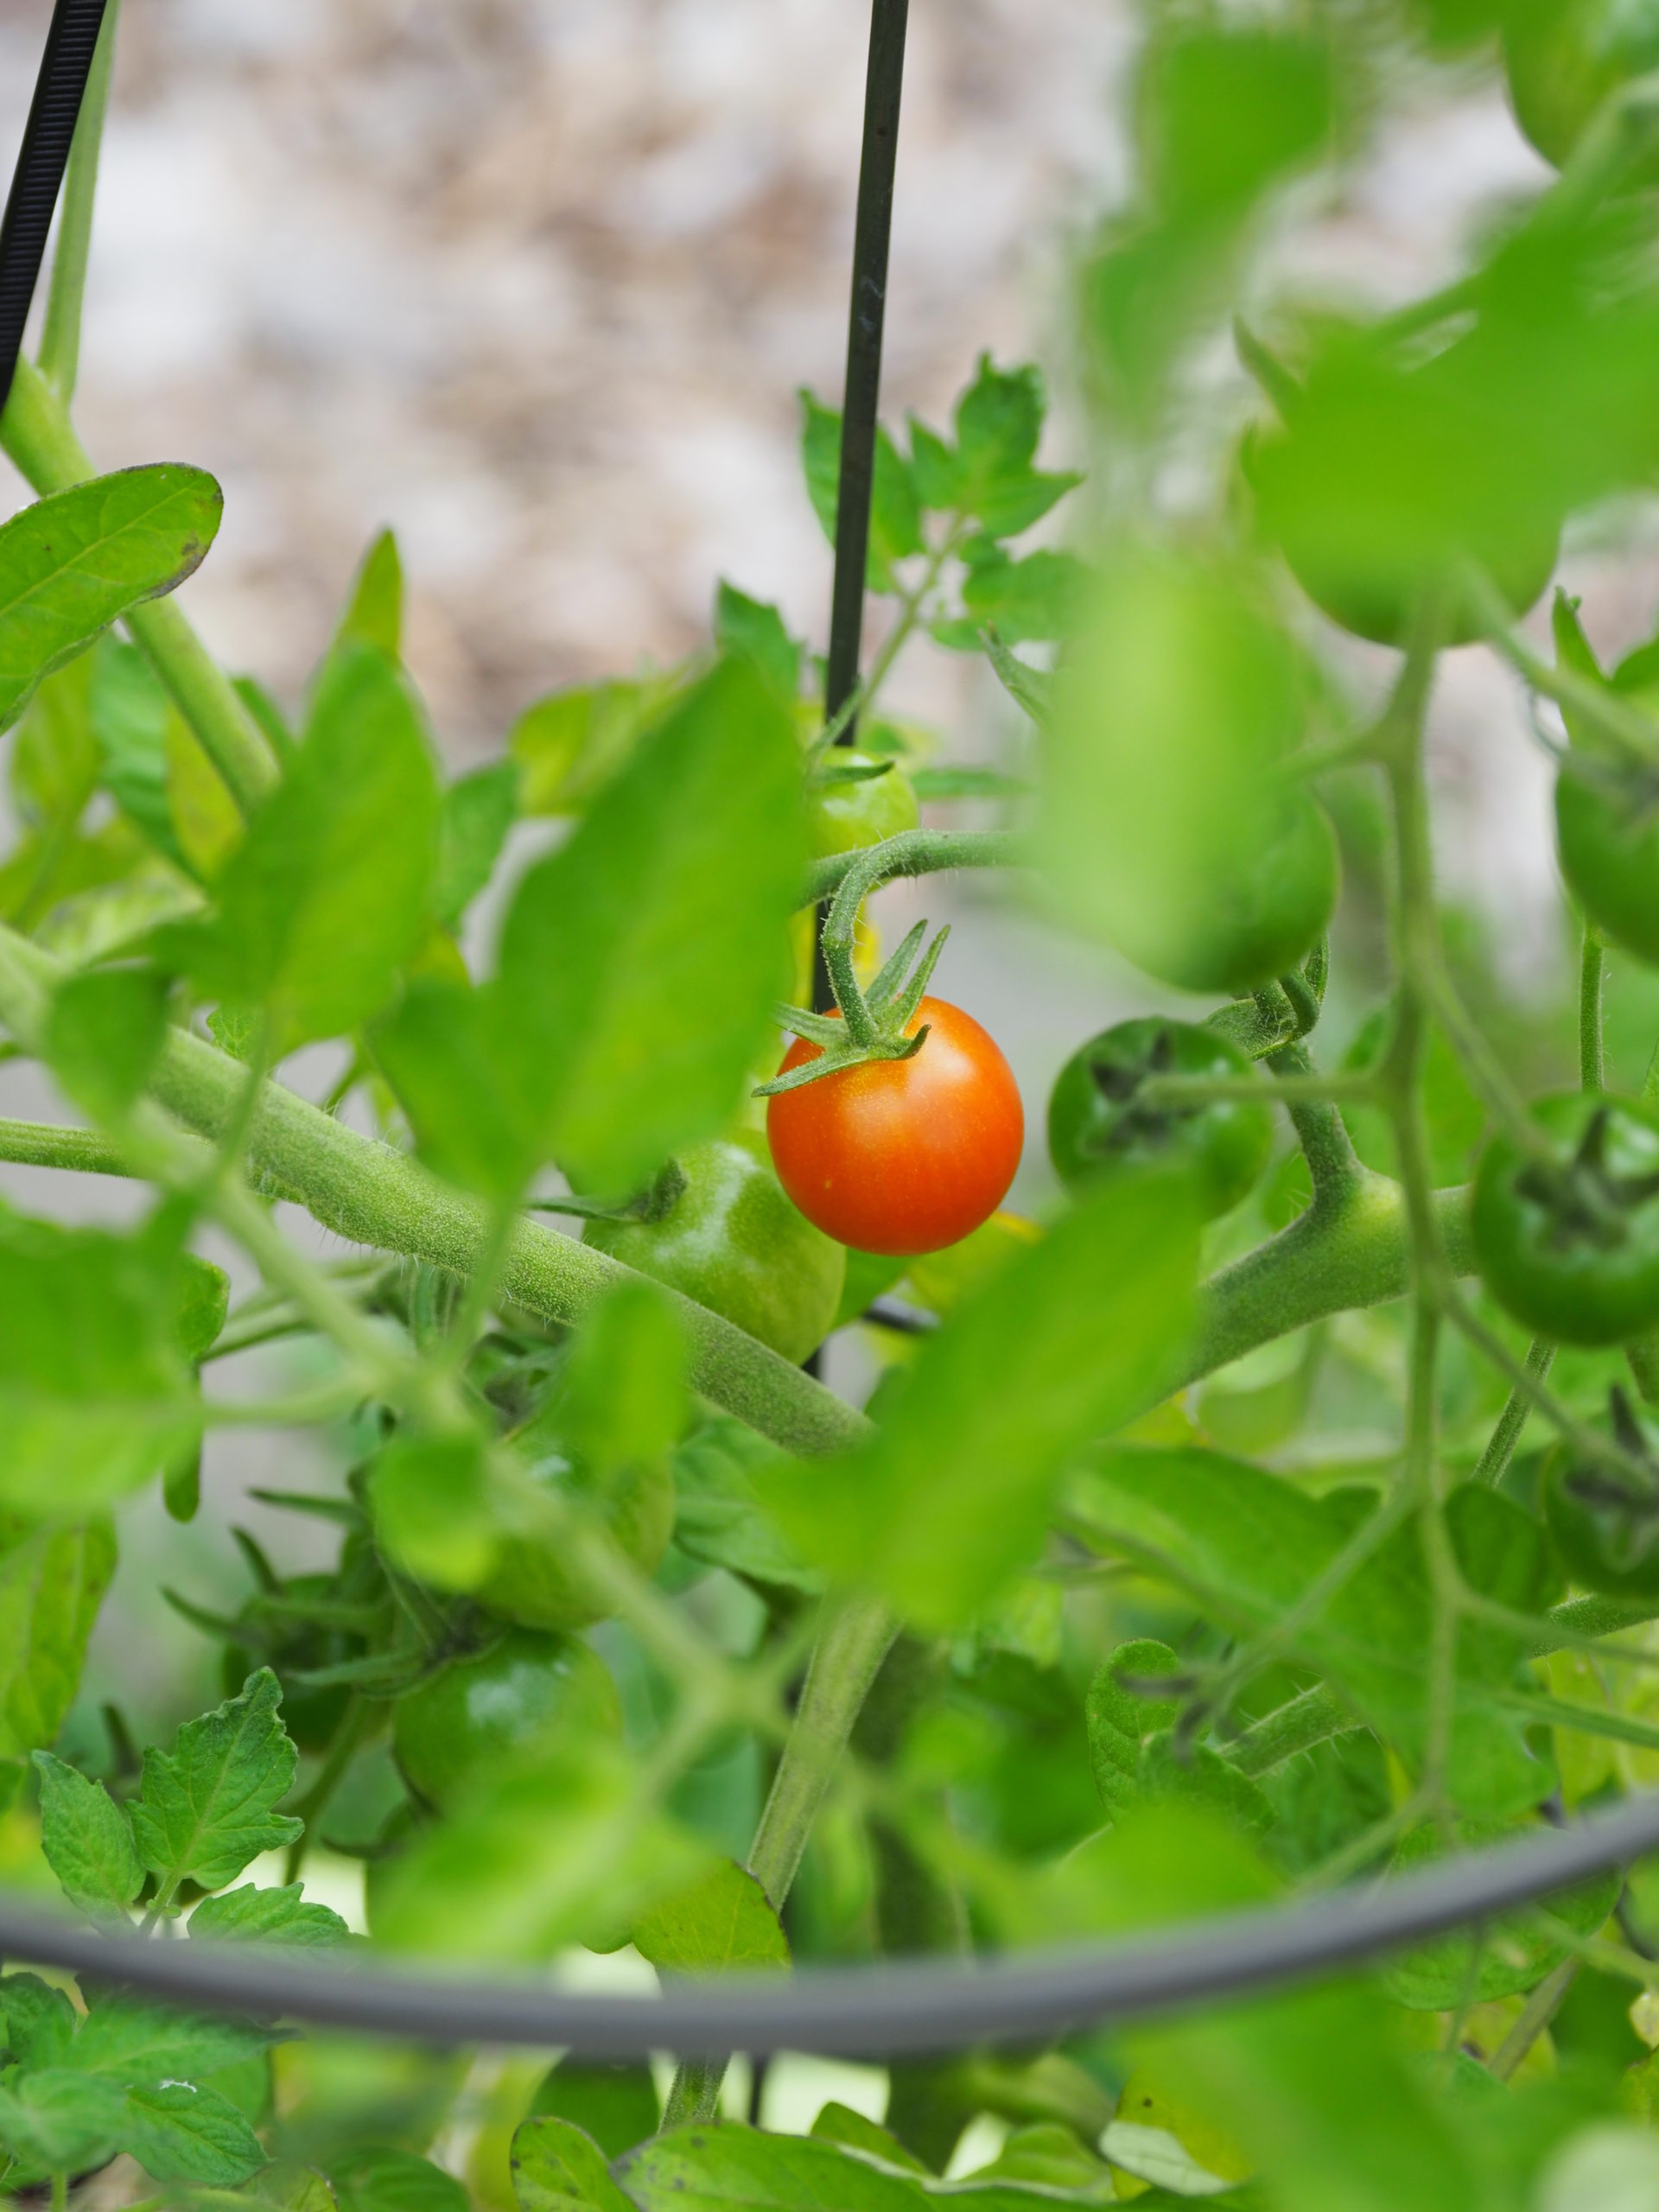 Like most cherry-type tomatoes, this one is an indeterminate and the first ripe one on the plant. This means that once the first red one shows up the hundreds are to follow for weeks to come.